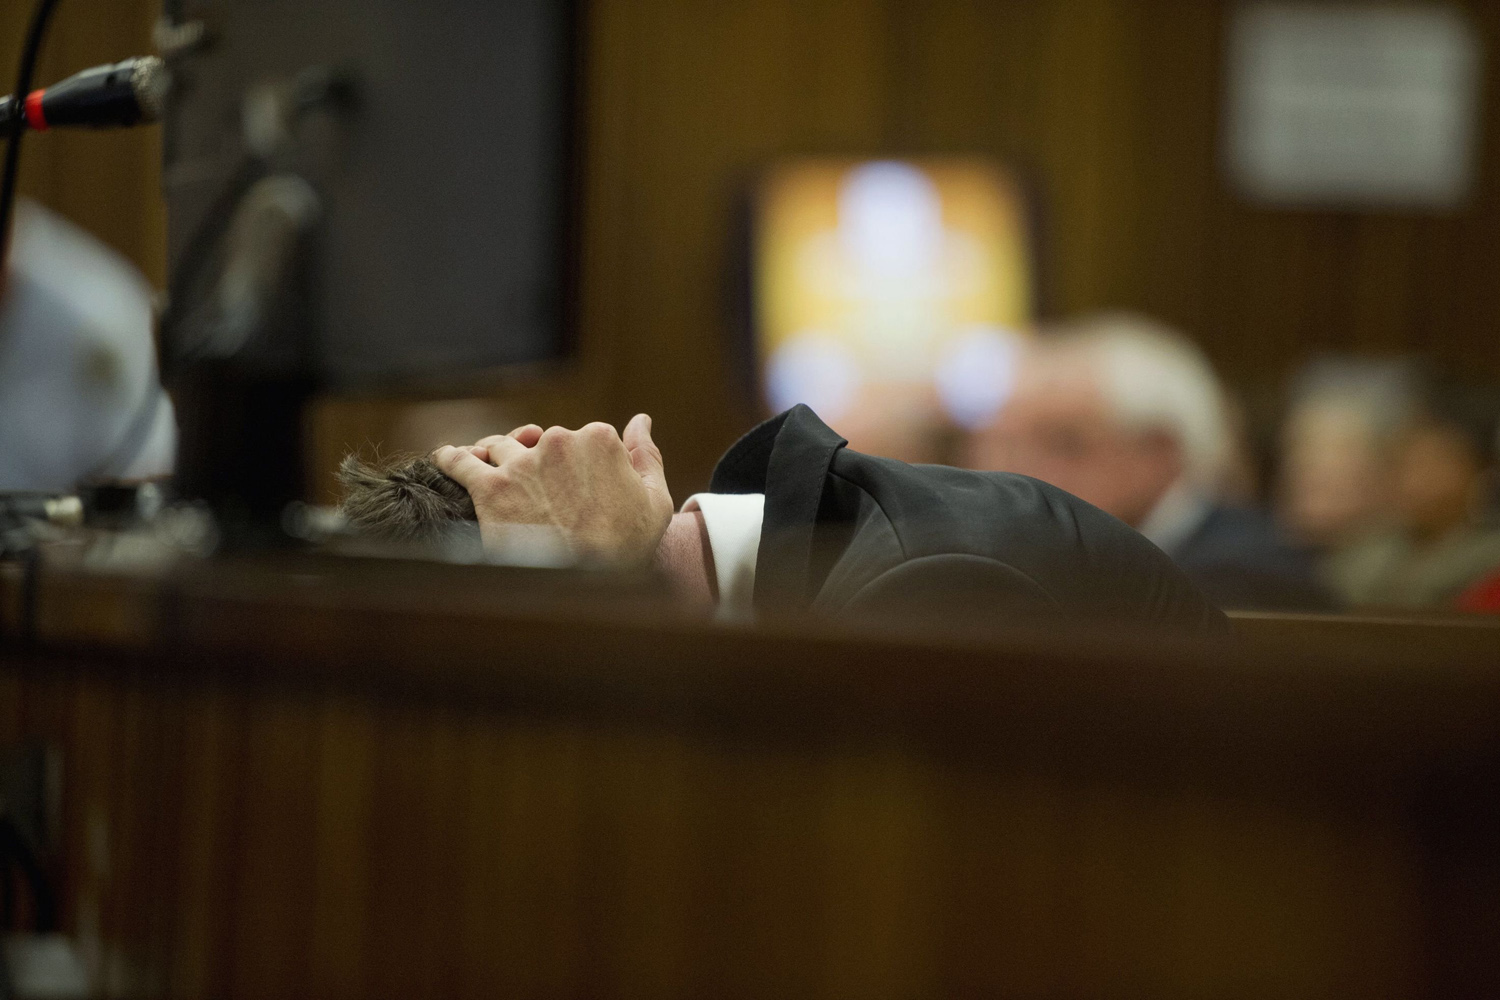 Apr. 7, 2014. Oscar Pistorius reacts during his trial at the high court in Pretoria. South African Paralympic and Olympic track star Oscar Pistorius is expected to take the stand for the first time on Monday in a bid to prove his innocence against charges he murdered his model girlfriend Reeva Steenkamp.